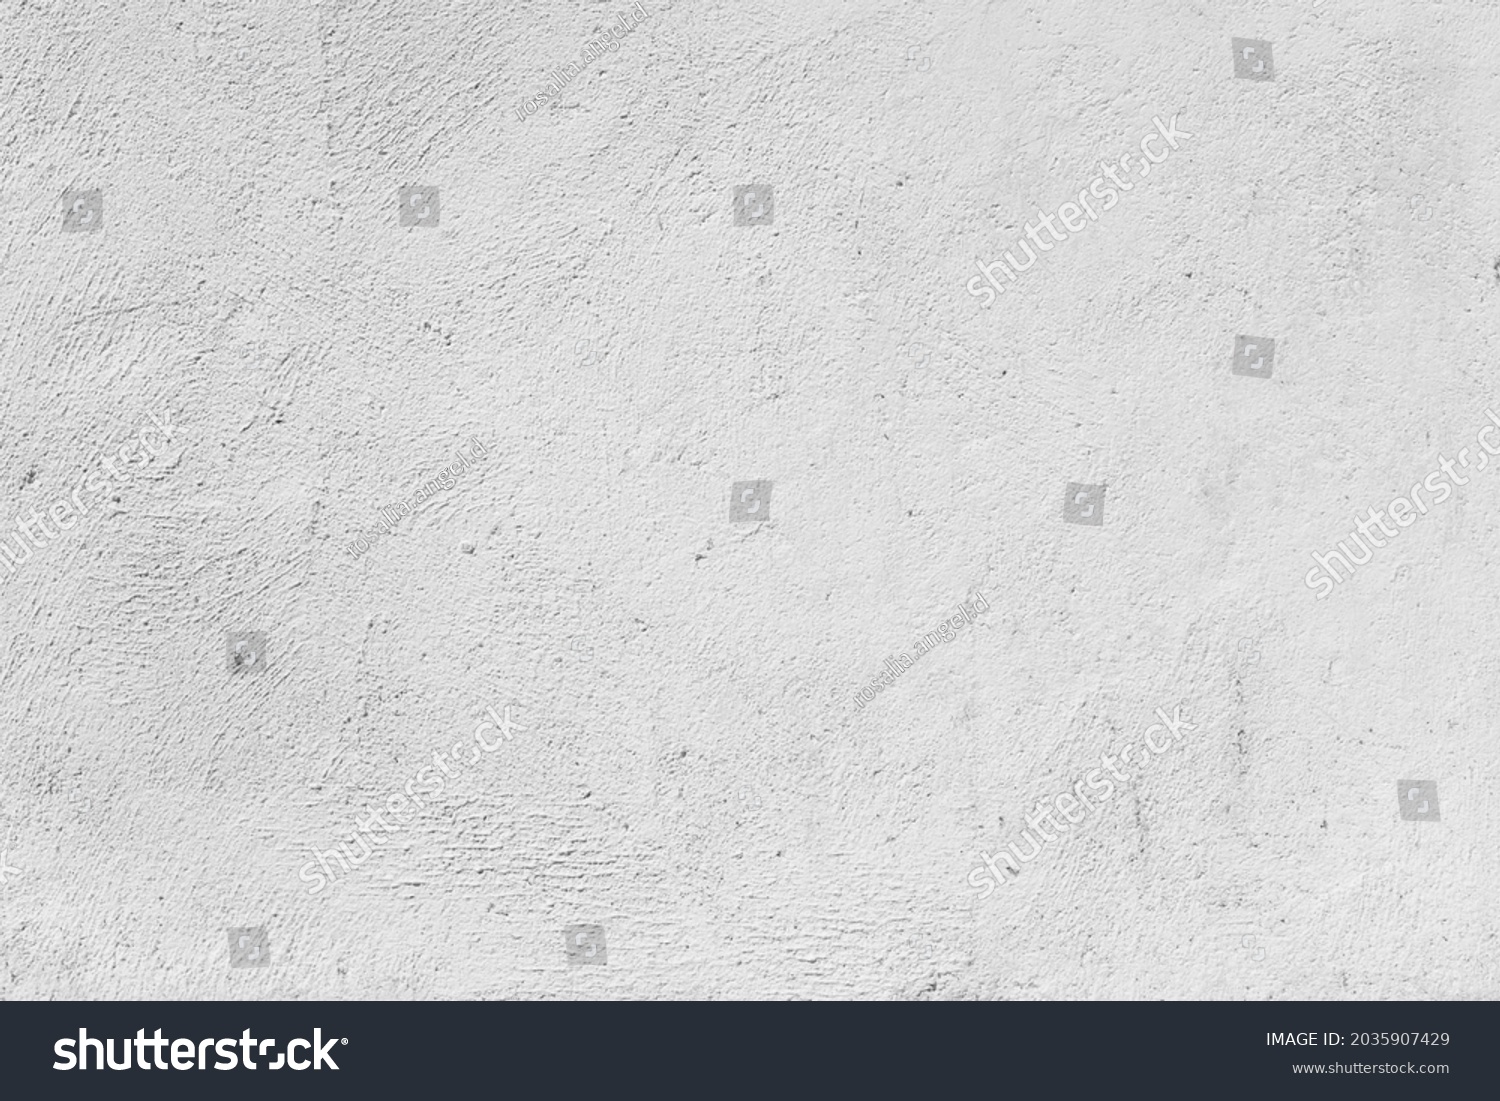 Pared Images, Stock Photos & Vectors | Shutterstock